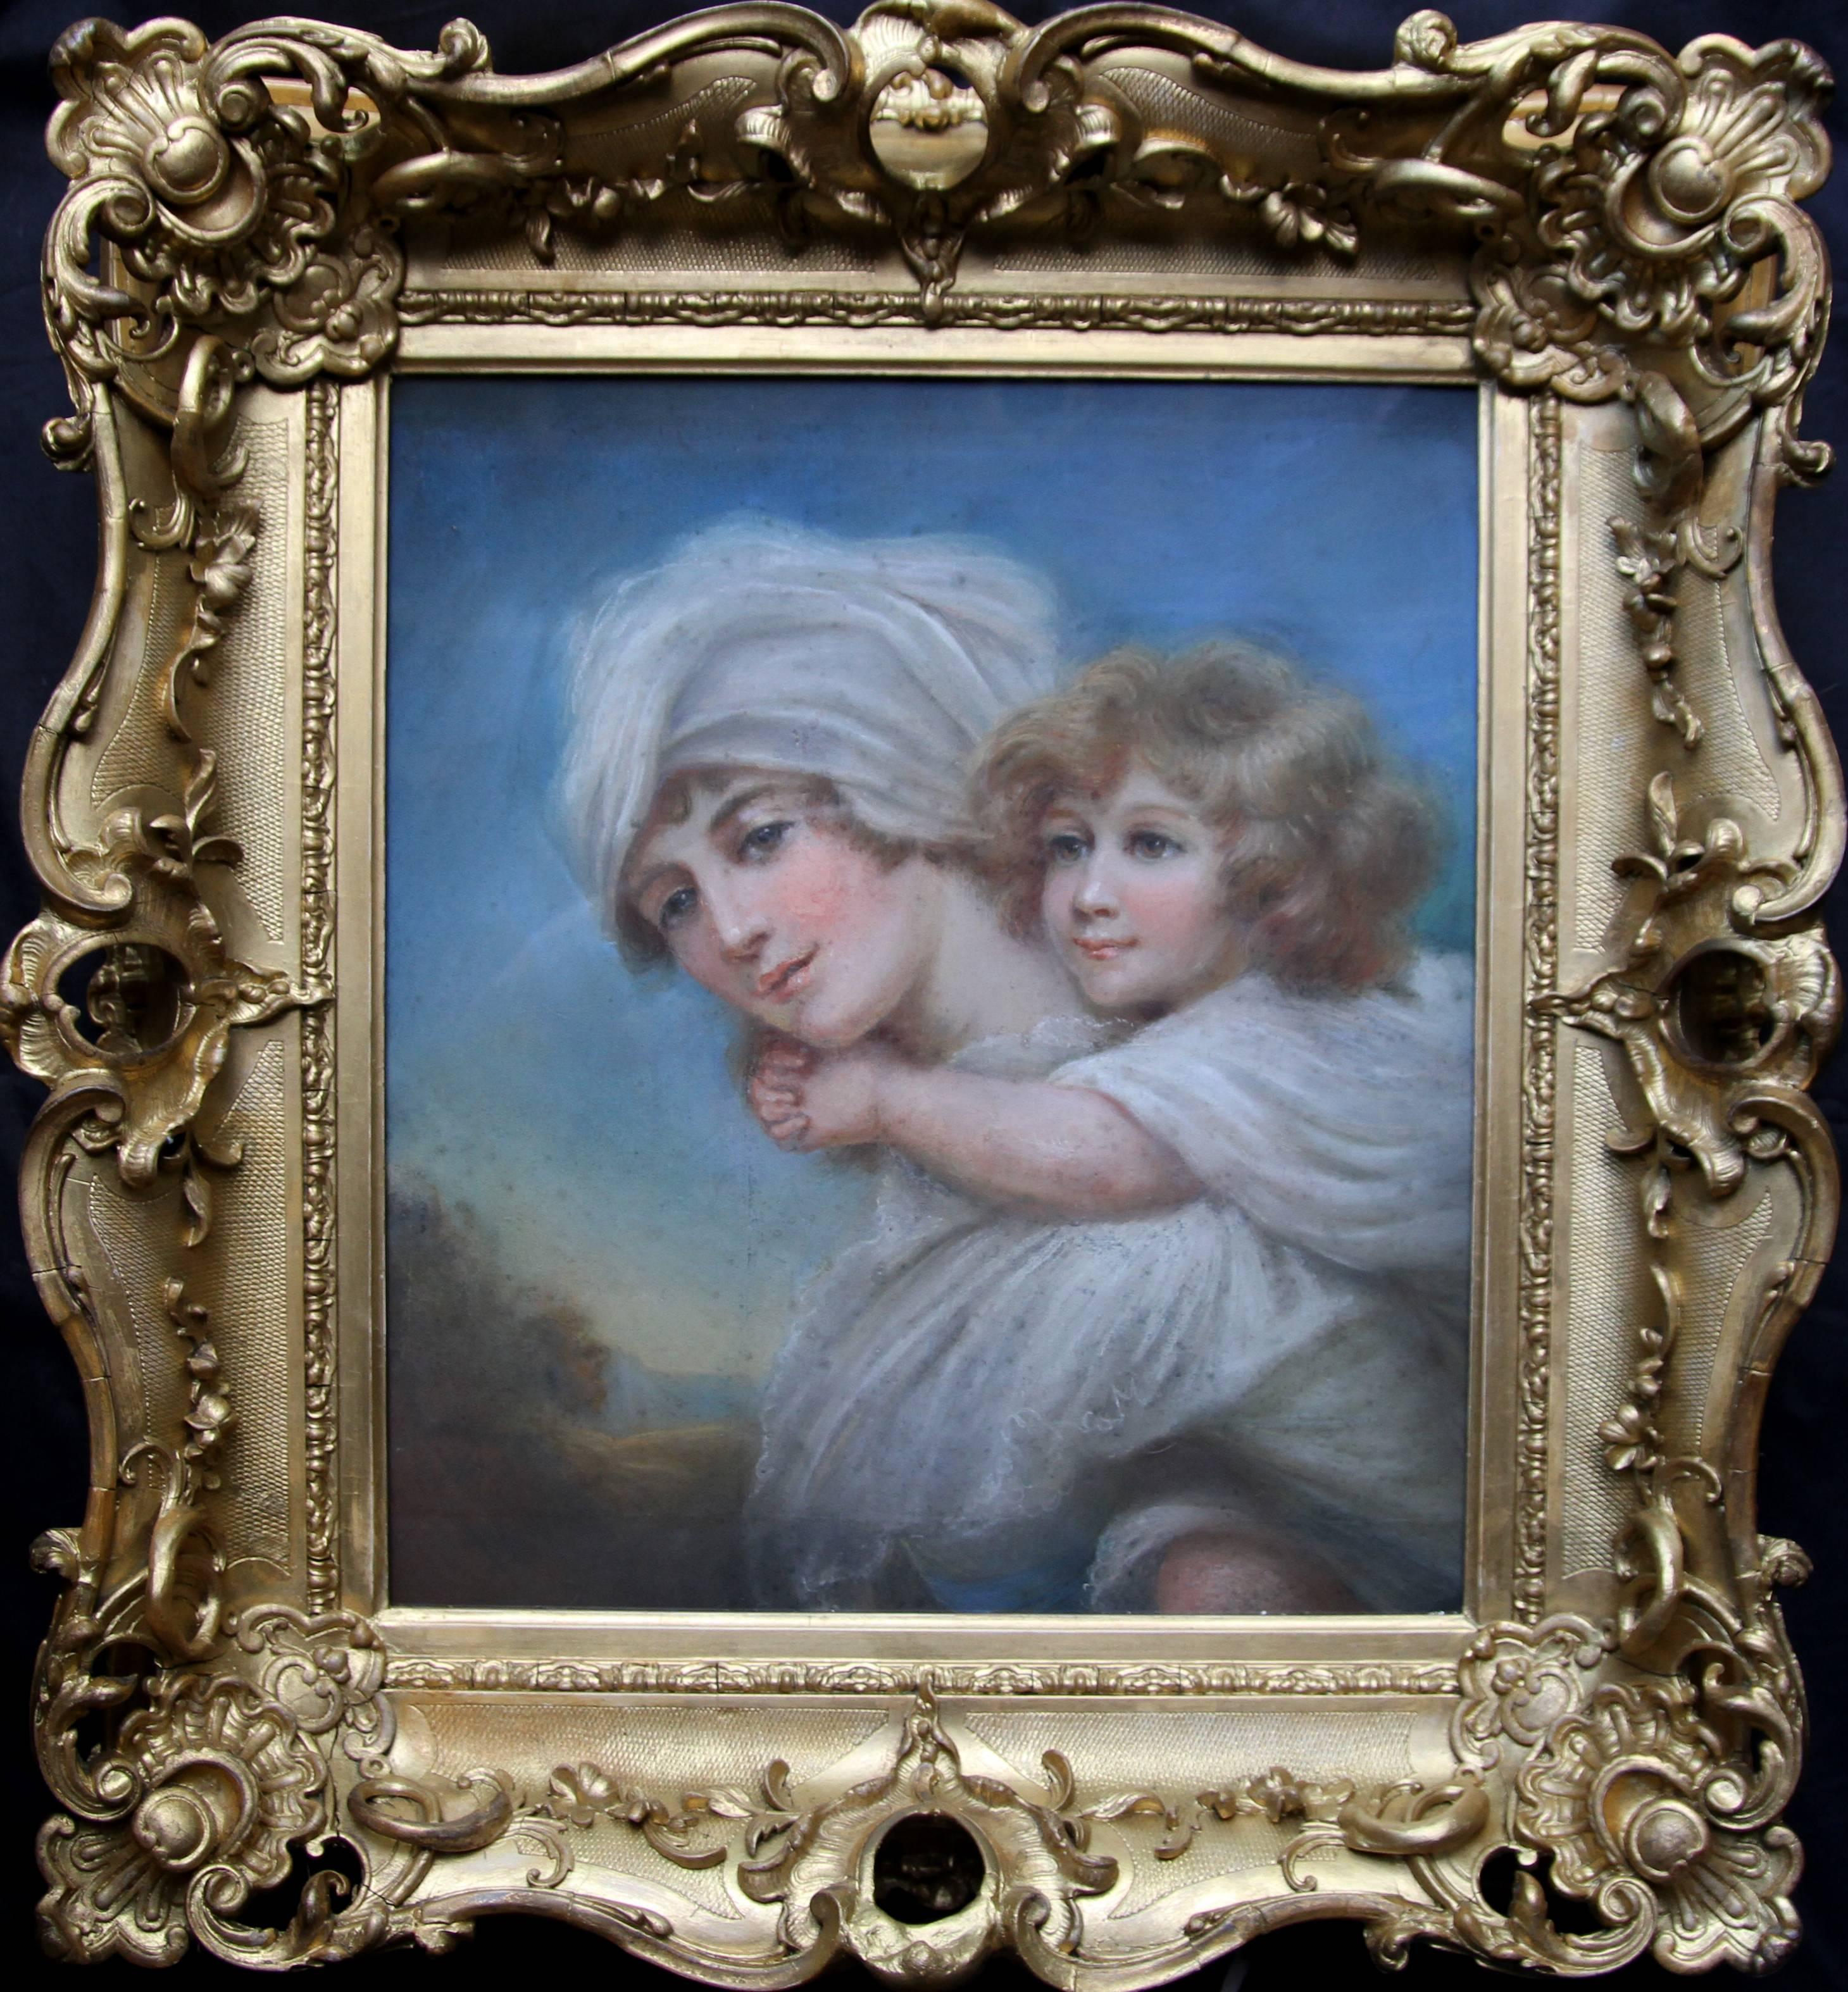 Unknown Portrait Painting - Woman and Child - Old Master Regency portrait painting Mother carrying infant